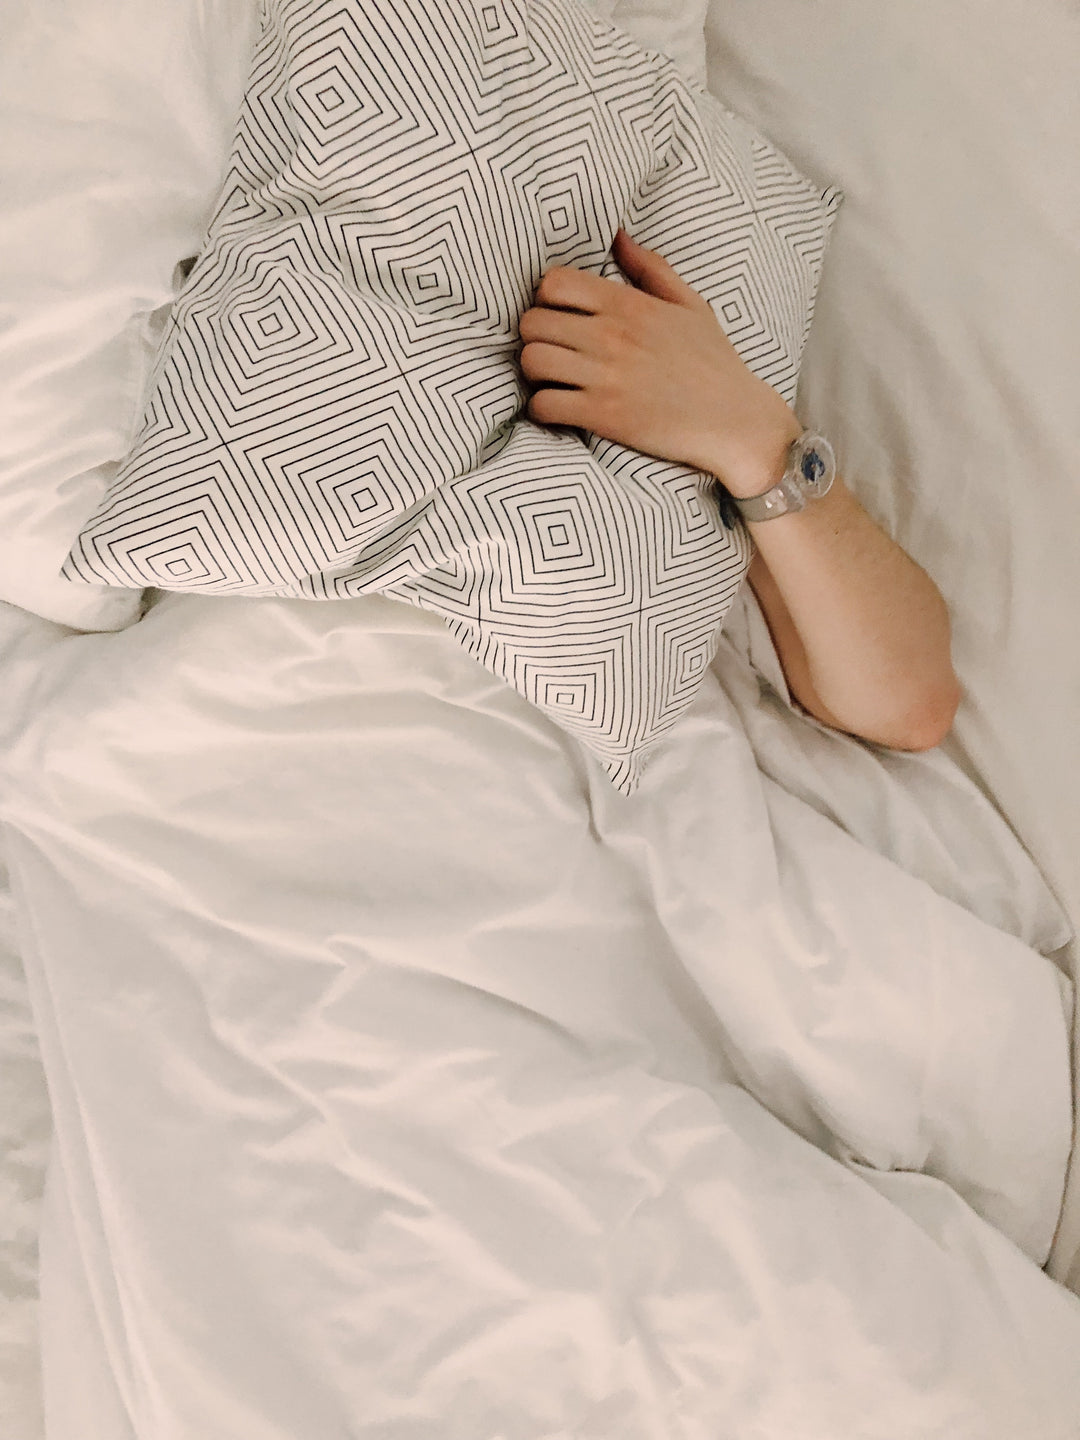 Managing the Negative Effects of Anxiety on Sleep